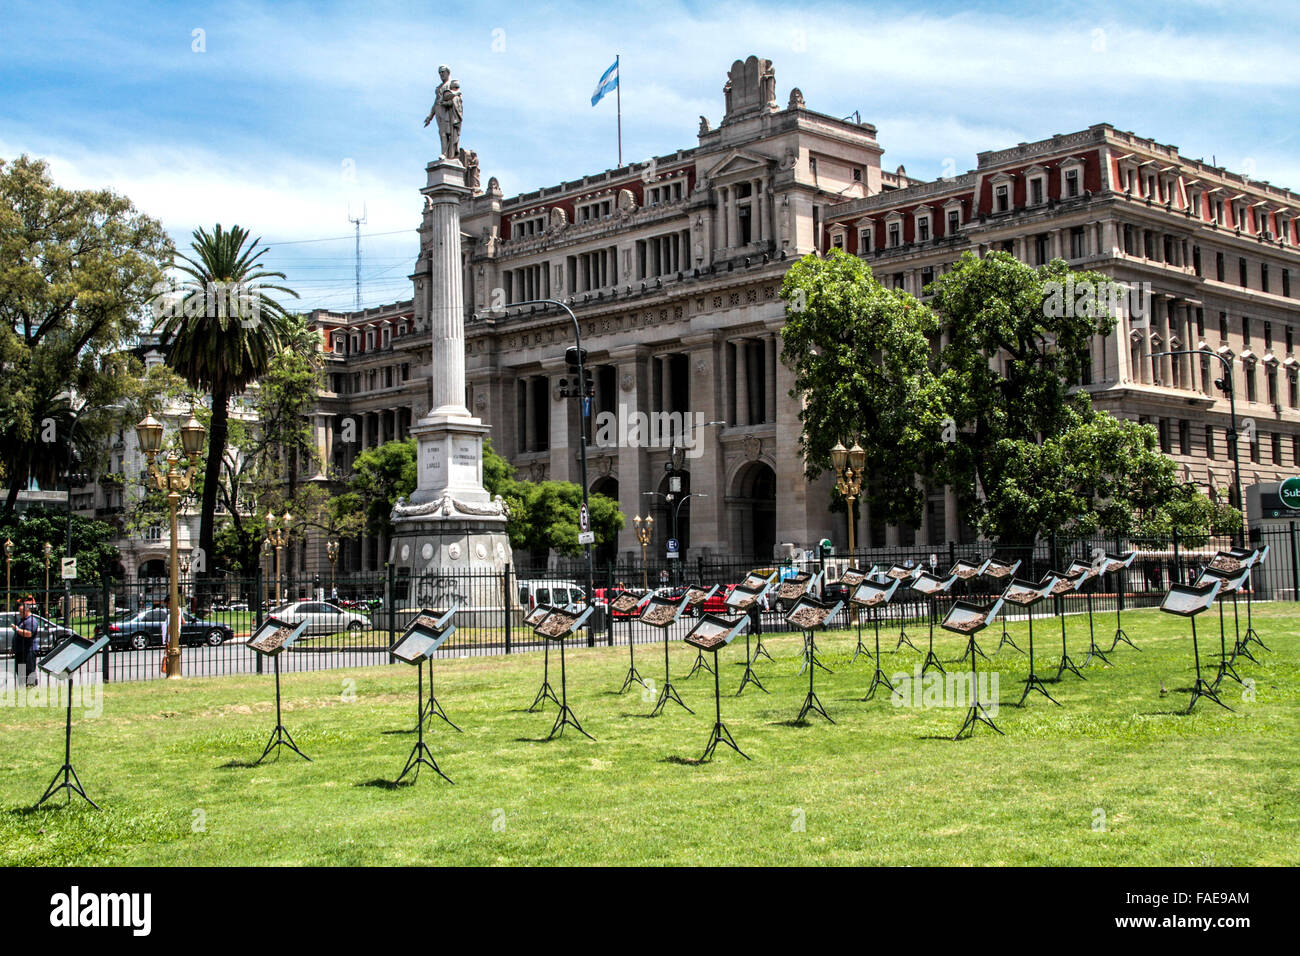 BUENOS AIRES, 28.12.2015 - Ansicht der Plaza Lavalle (Lavalle Quadrat) vor Colon Theater und Palace of Justice in Buenos Aire Stockfoto